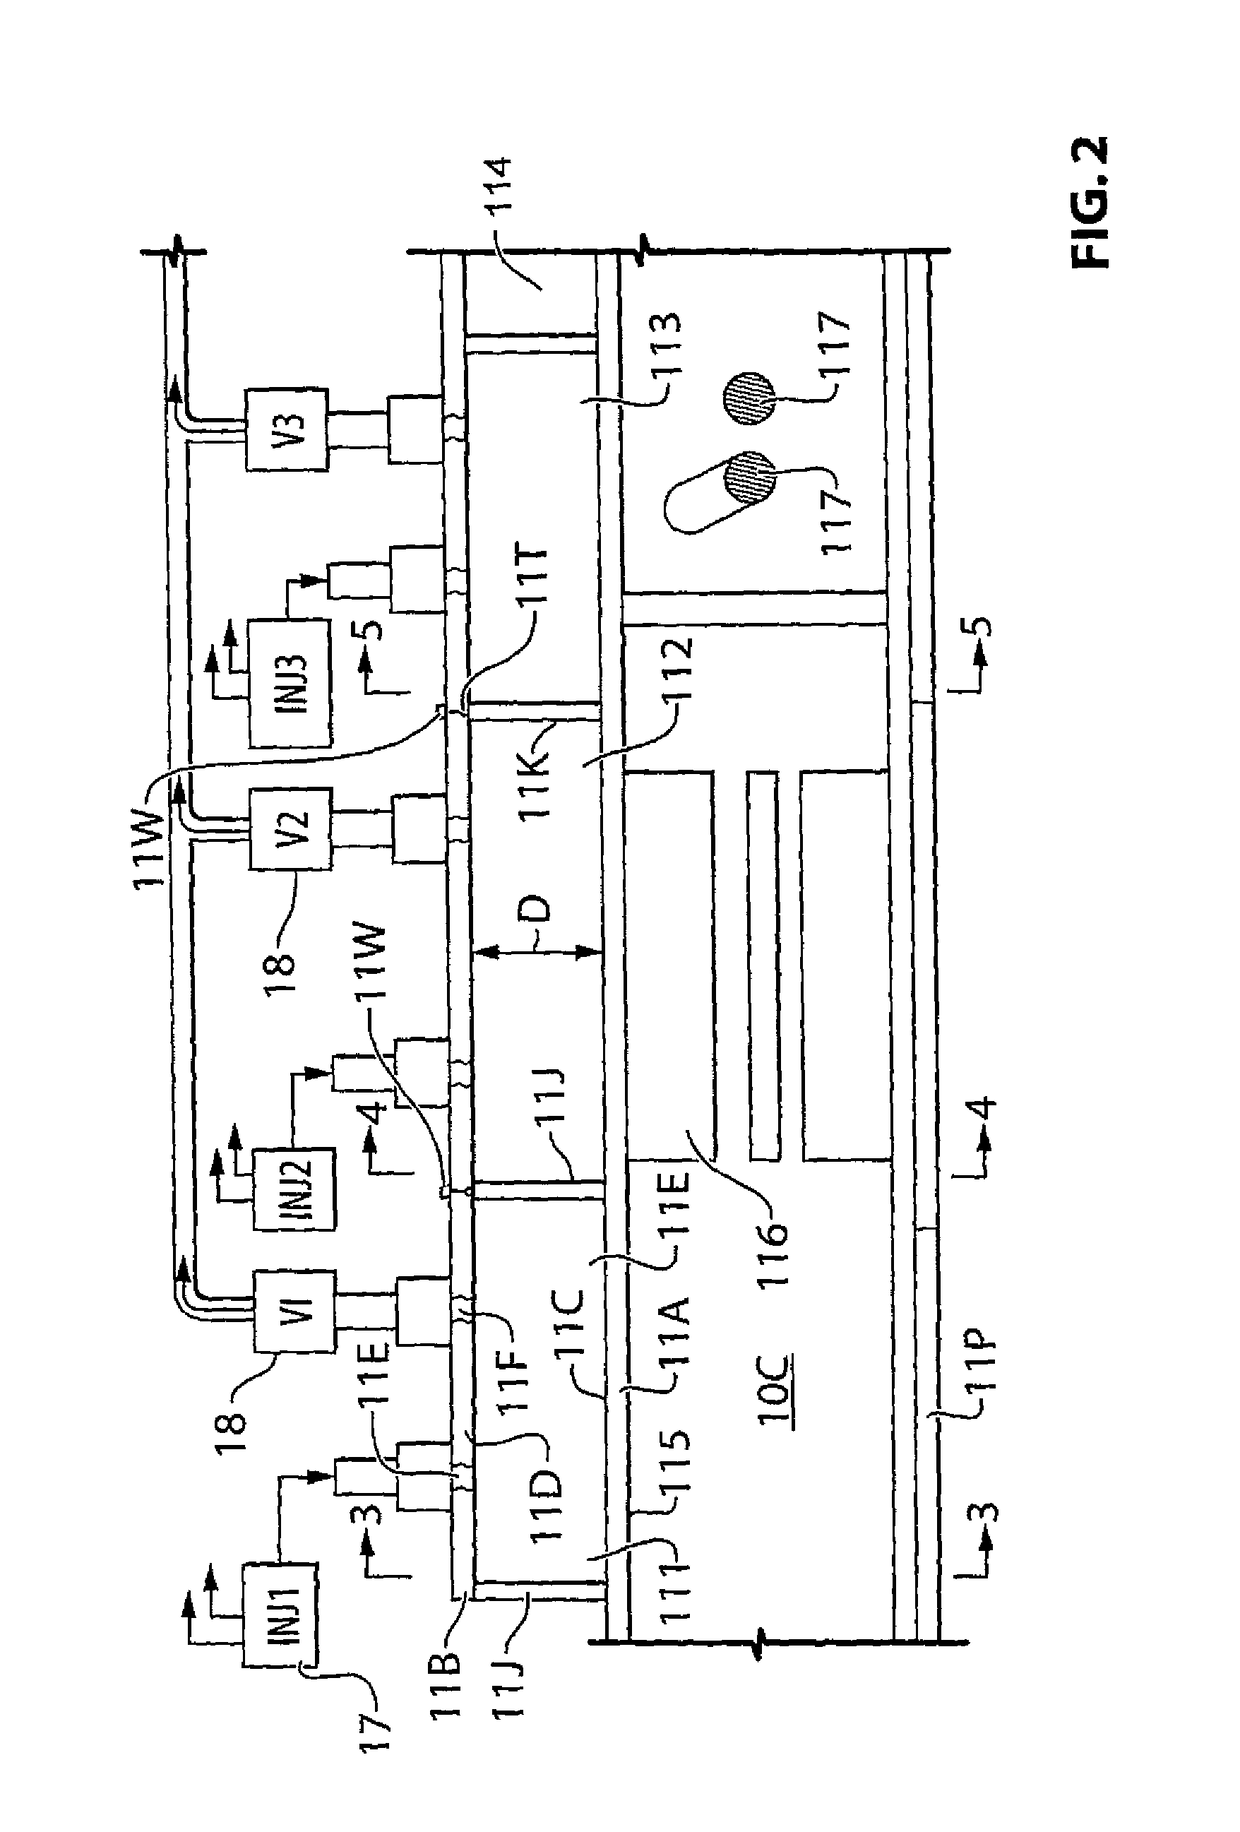 Method of steam generation by spraying water onto a duct within a chamber having divider walls